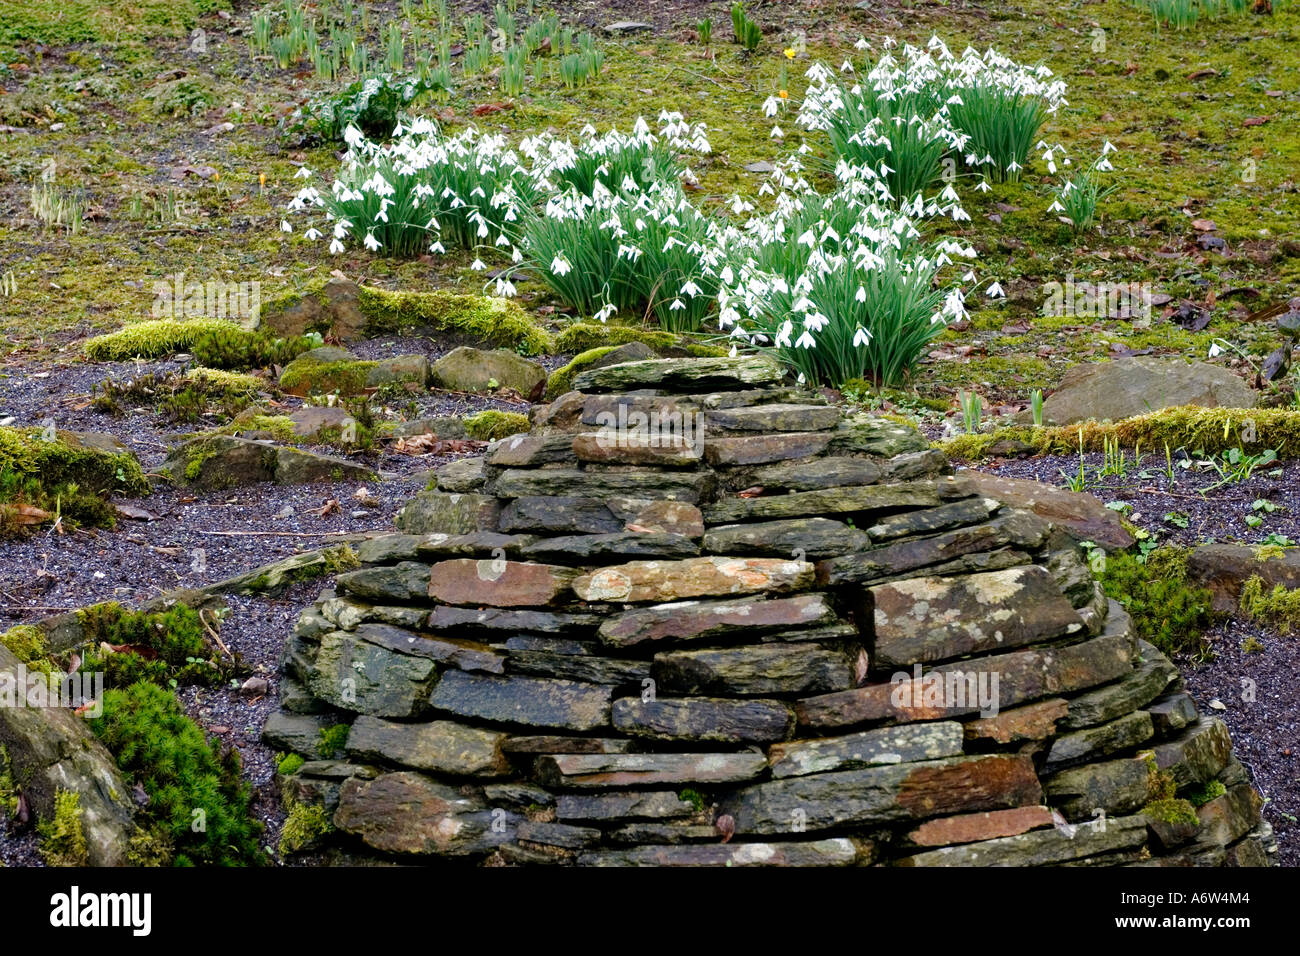 GALANTHUS 'JAMES BACKHOUSE' (SNOWDROP) WITH STONE WALL SCULPTURE AT THE GARDEN HOUSE, DEVON, ENGLAND Stock Photo